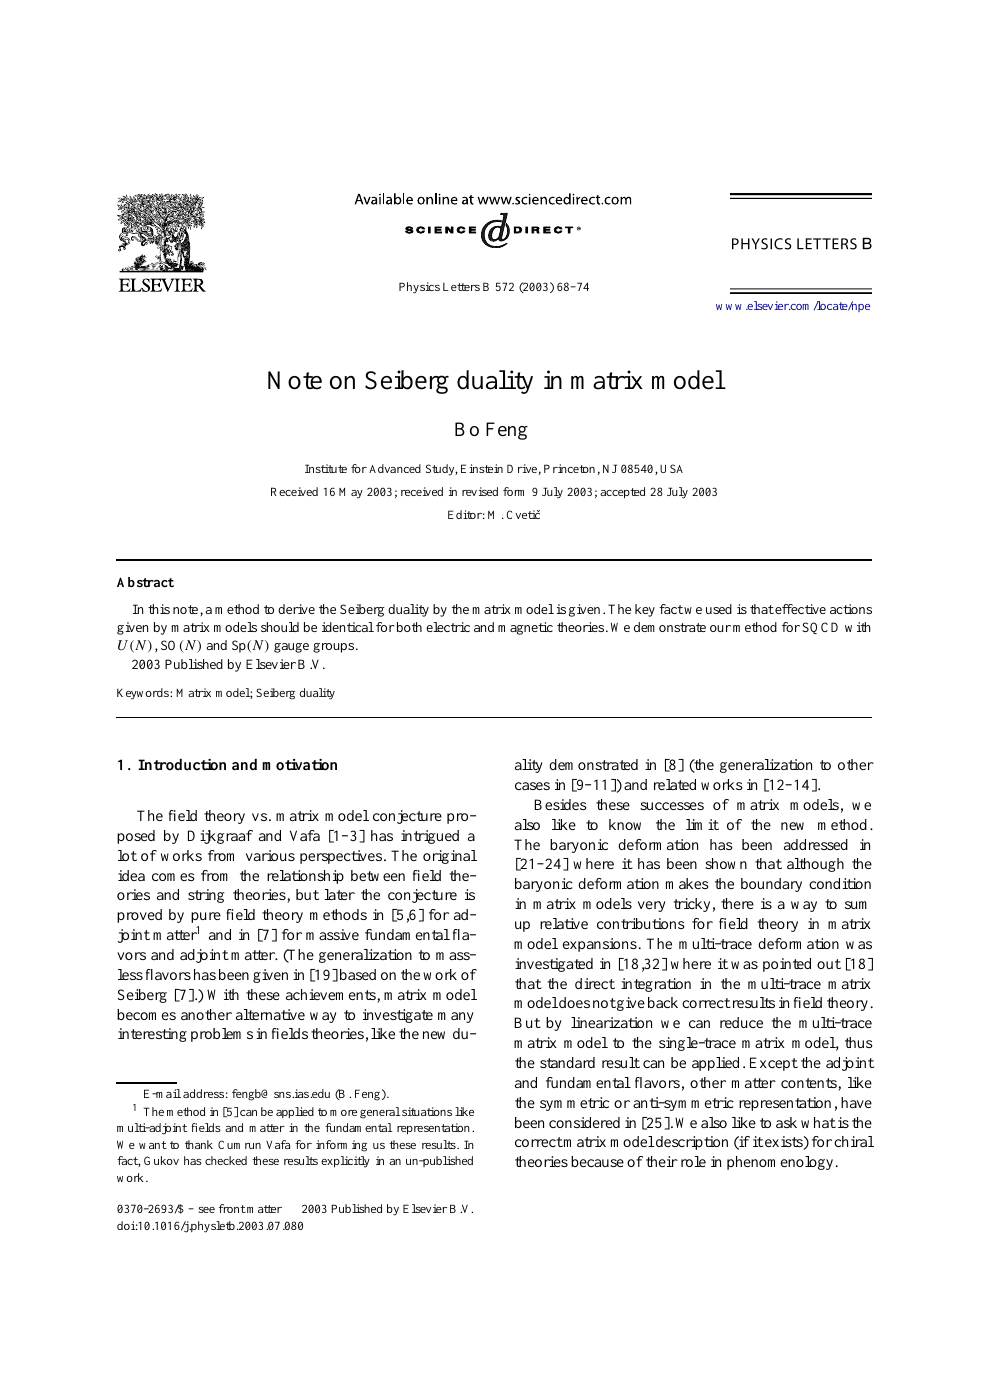 Note On Seiberg Duality In Matrix Model Topic Of Research Paper In Physical Sciences Download Scholarly Article Pdf And Read For Free On Cyberleninka Open Science Hub